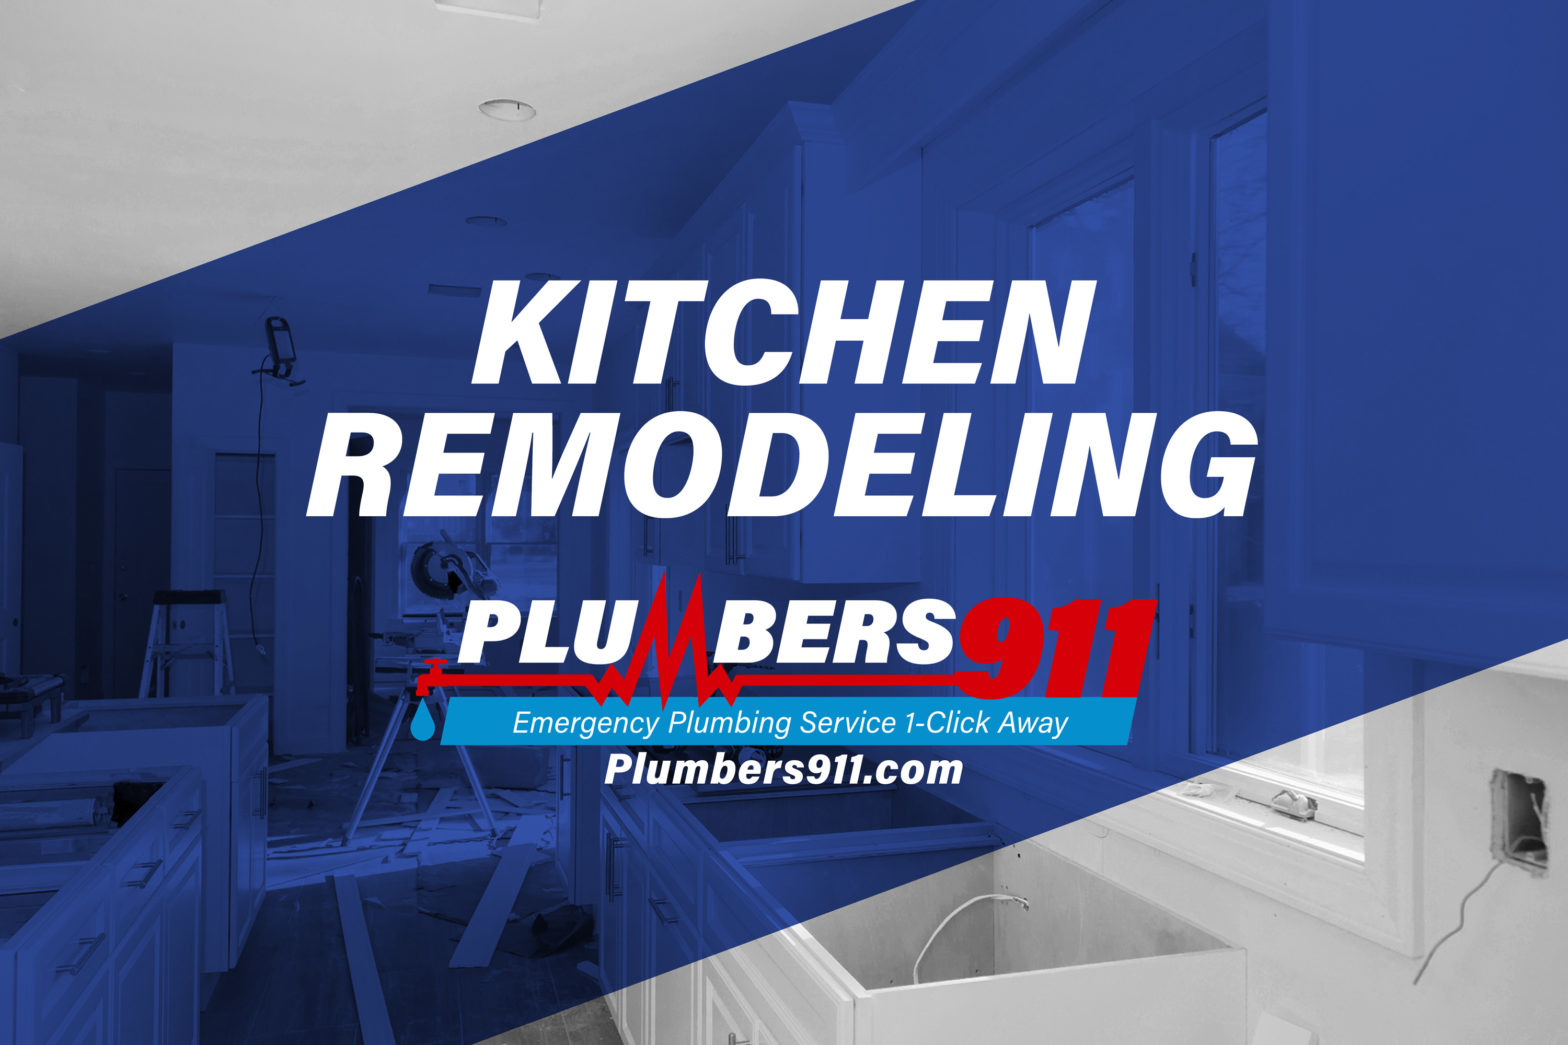 Kitchen Remodeling Plumbers 911 1568x1045 